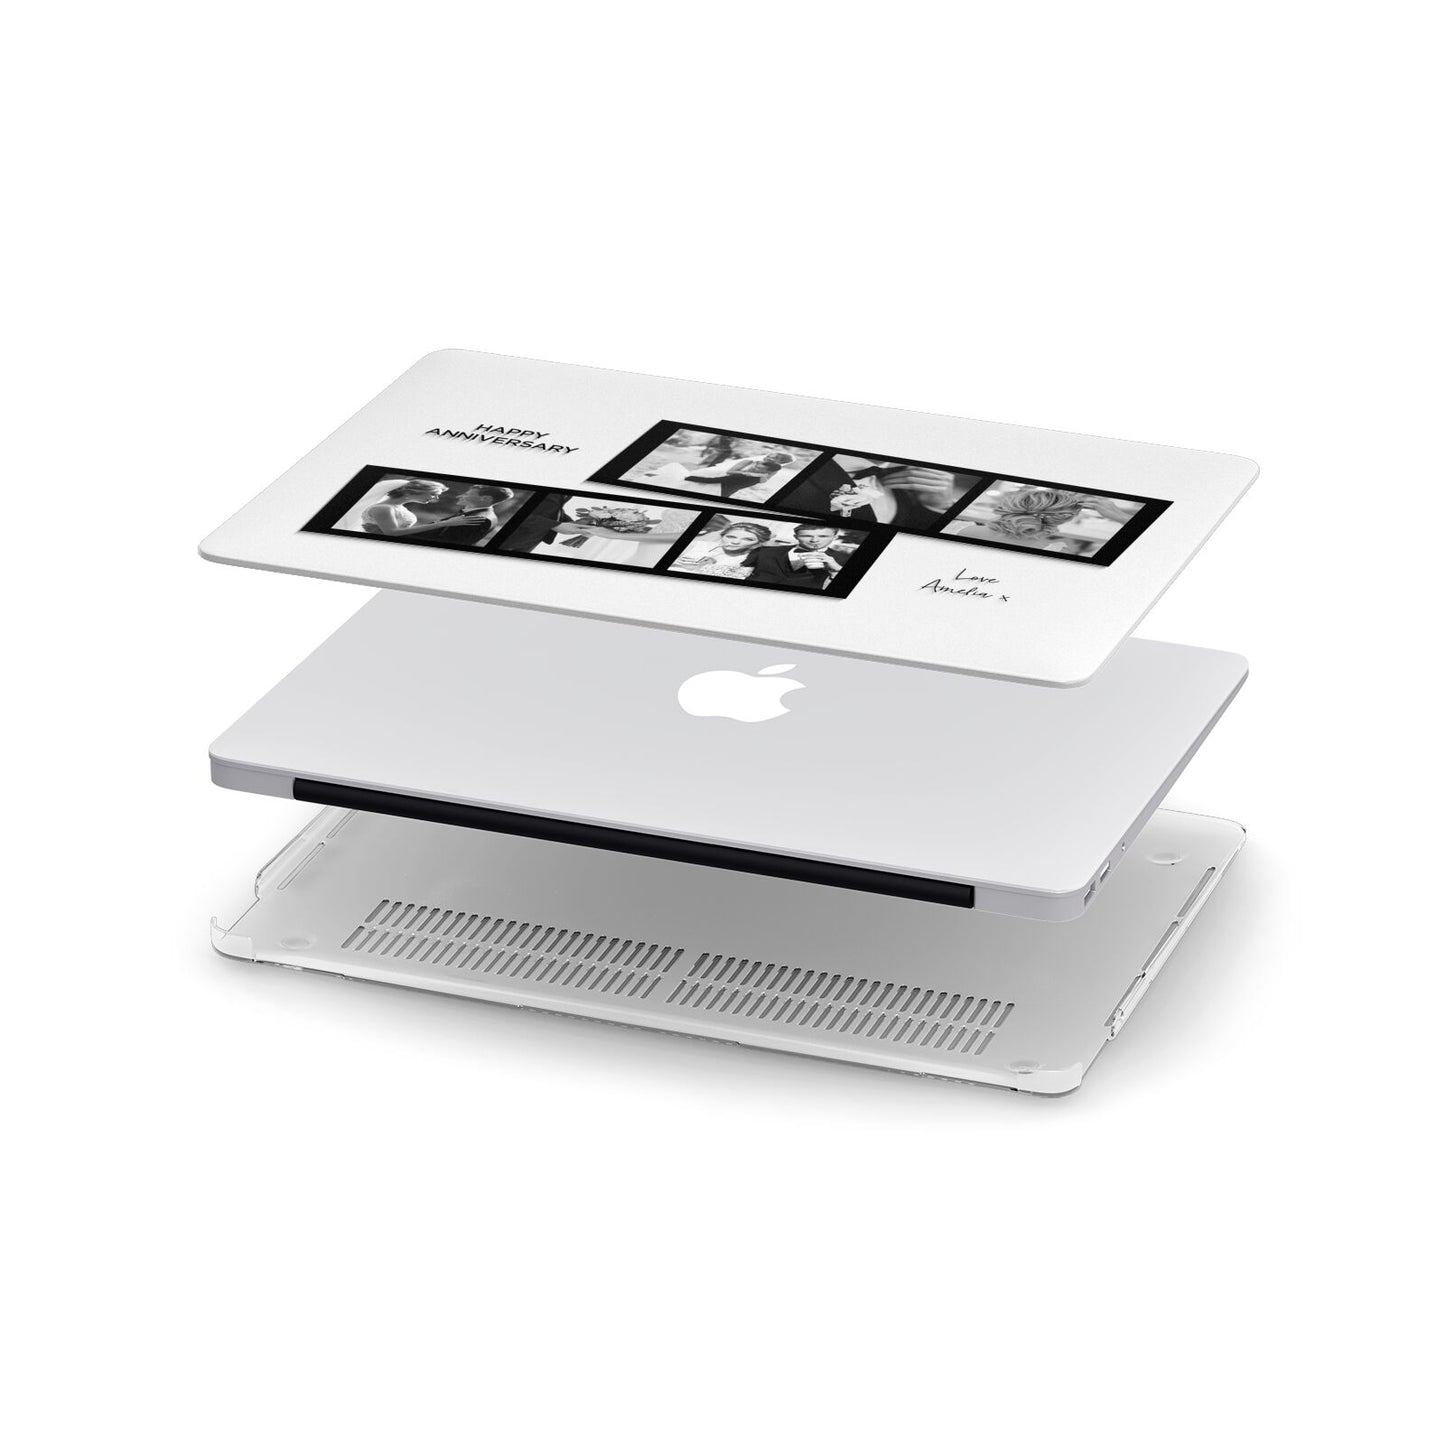 Monochrome Anniversary Photo Strip with Name Apple MacBook Case in Detail